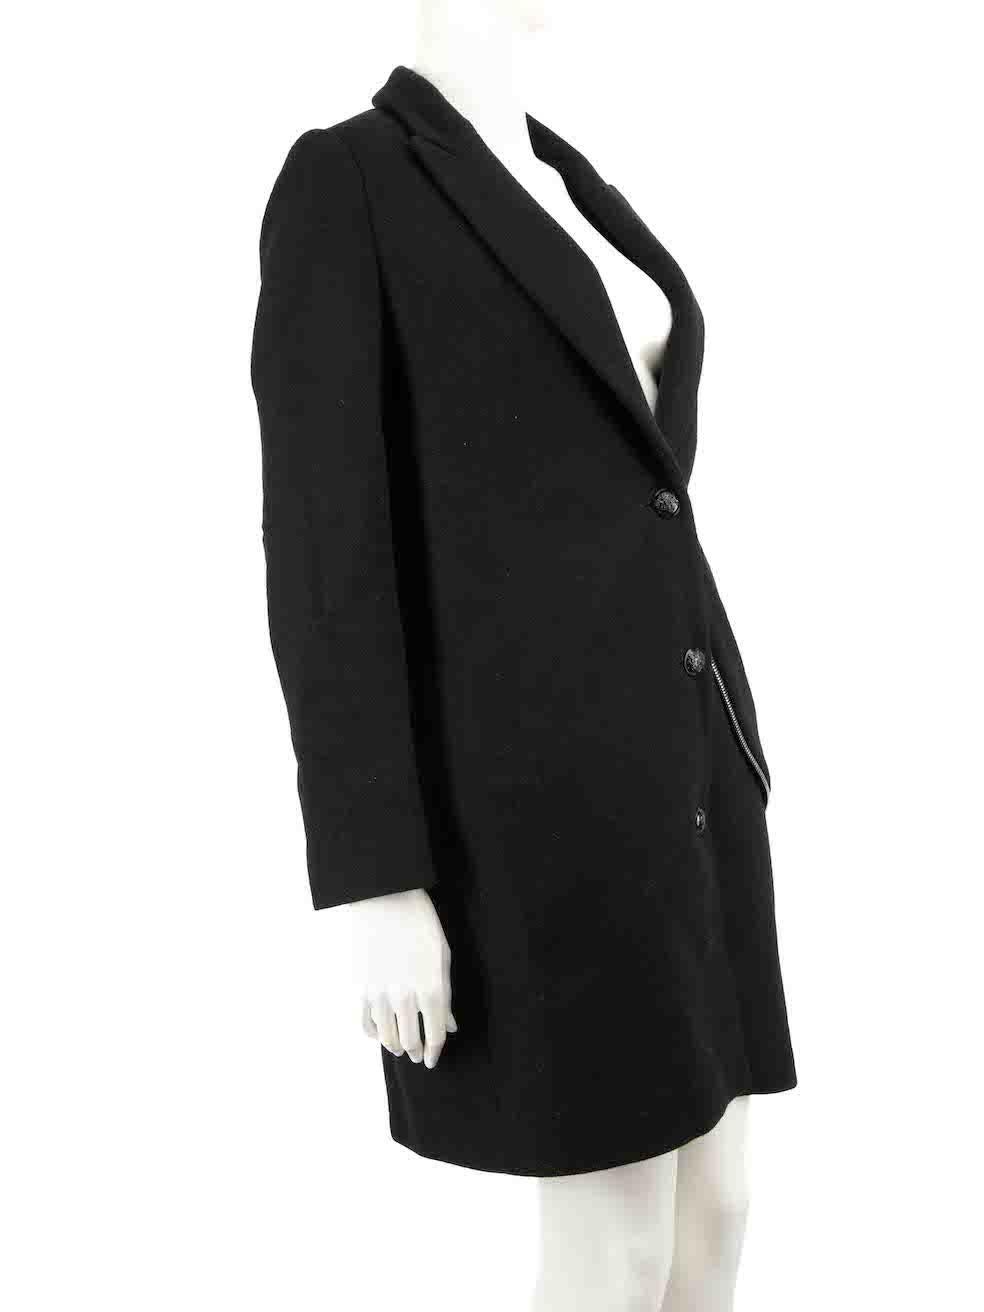 CONDITION is Very good. Minimal wear to coat is evident. Minimal wear to the front and underarms with light pilling to the texture on this used Lanvin designer resale item.
 
 
 
 Details
 
 
 Black
 
 Wool
 
 Coat
 
 Single breasted
 
 Shoulder